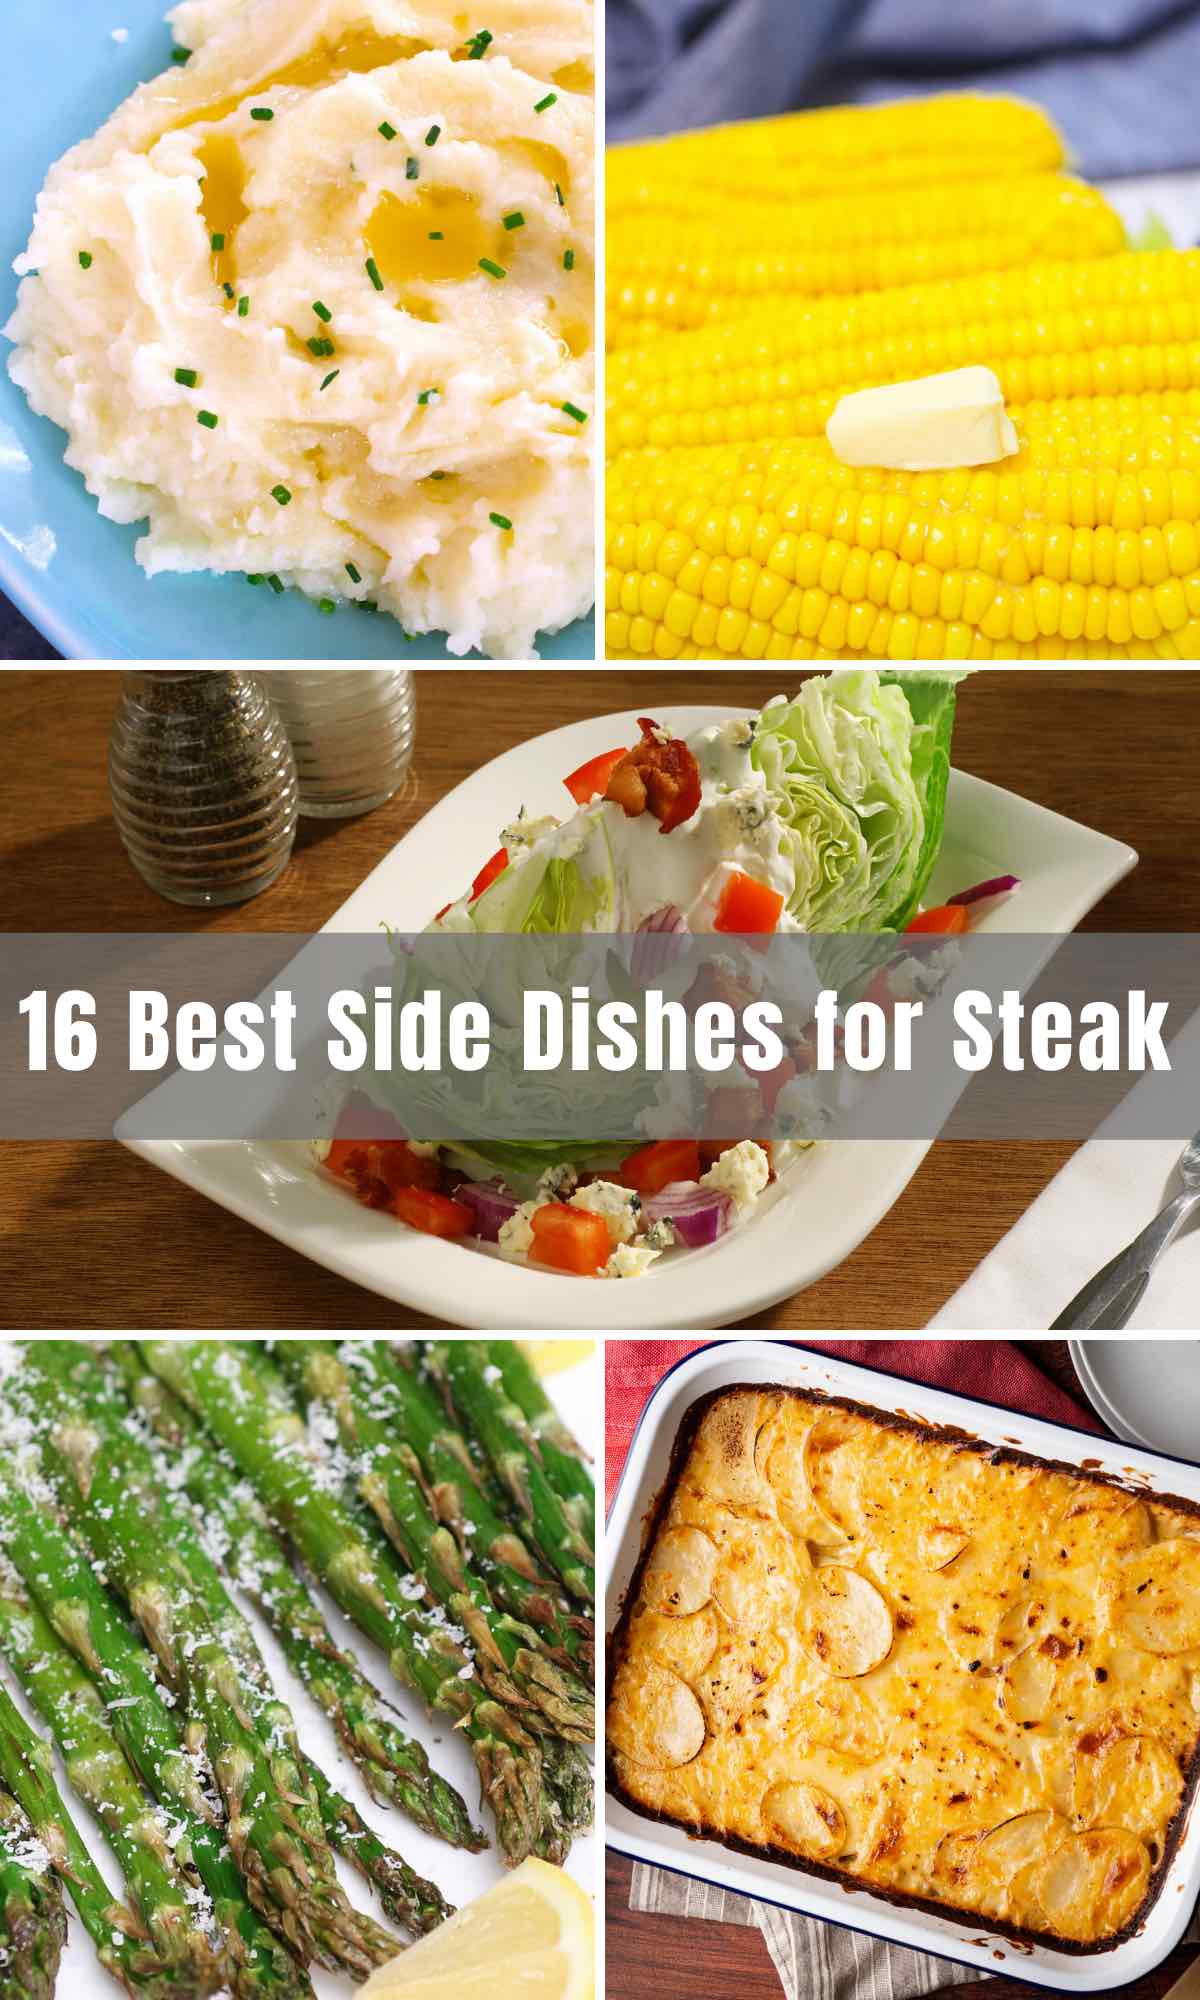 While many say there’s an art to cooking the perfect steak, there’s also an art to pairing it with the best side dishes. This Steak Sides list will give you options to explore when planning for your next steak dinner, from healthy vegetables to delicious potato recipes, these side dishes will take your steak to a new level!